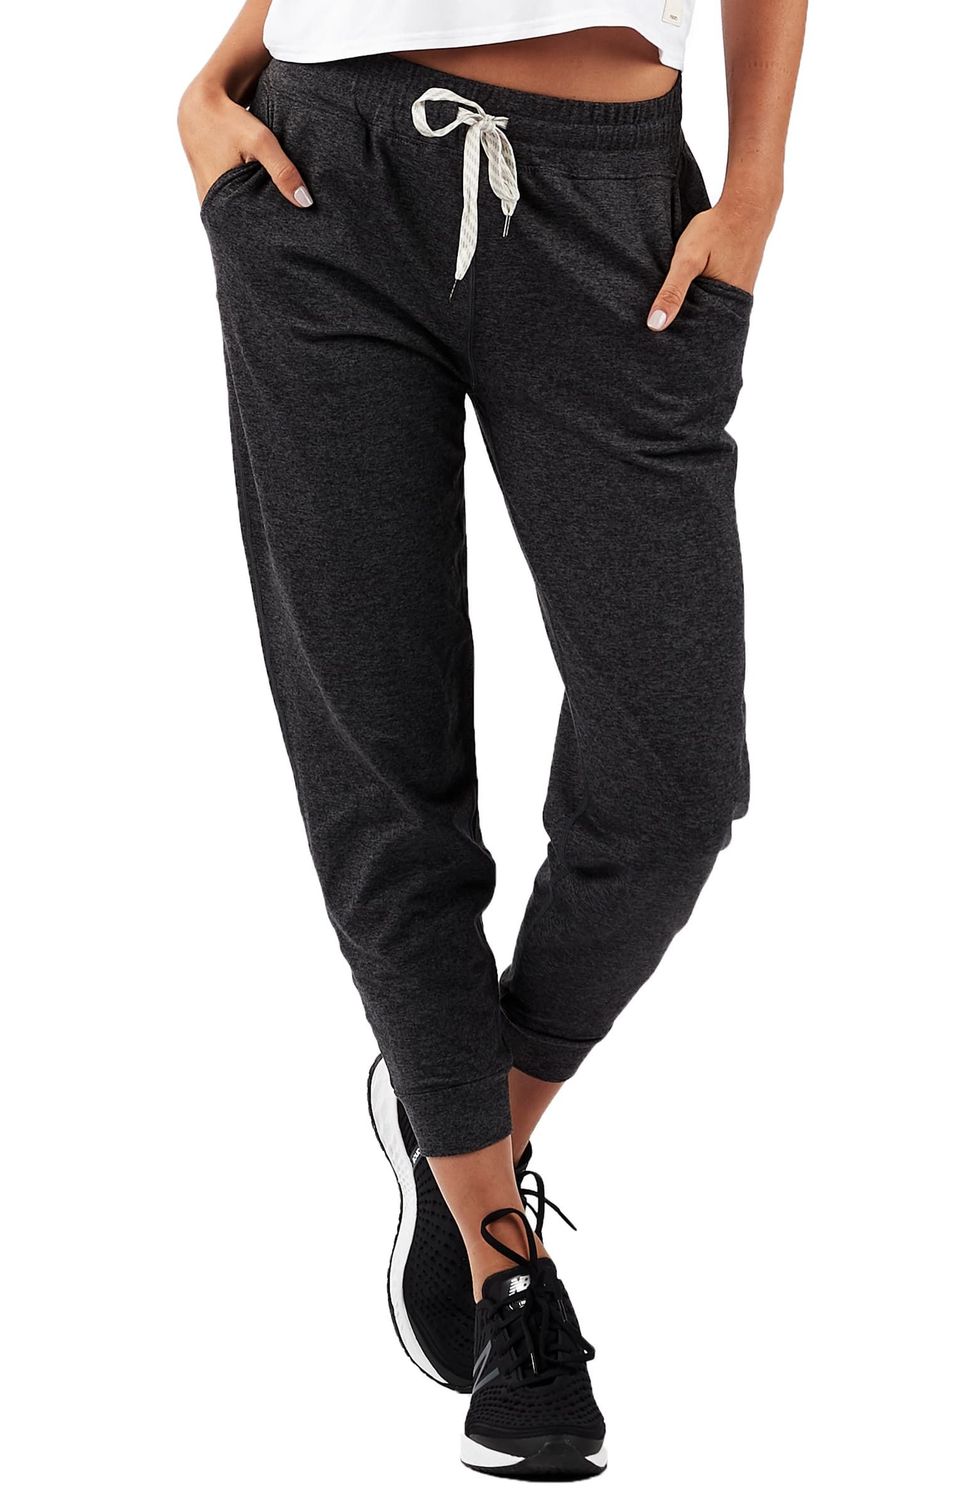 Free People Work It Out Joggers at YogaOutlet.com - Free Shipping